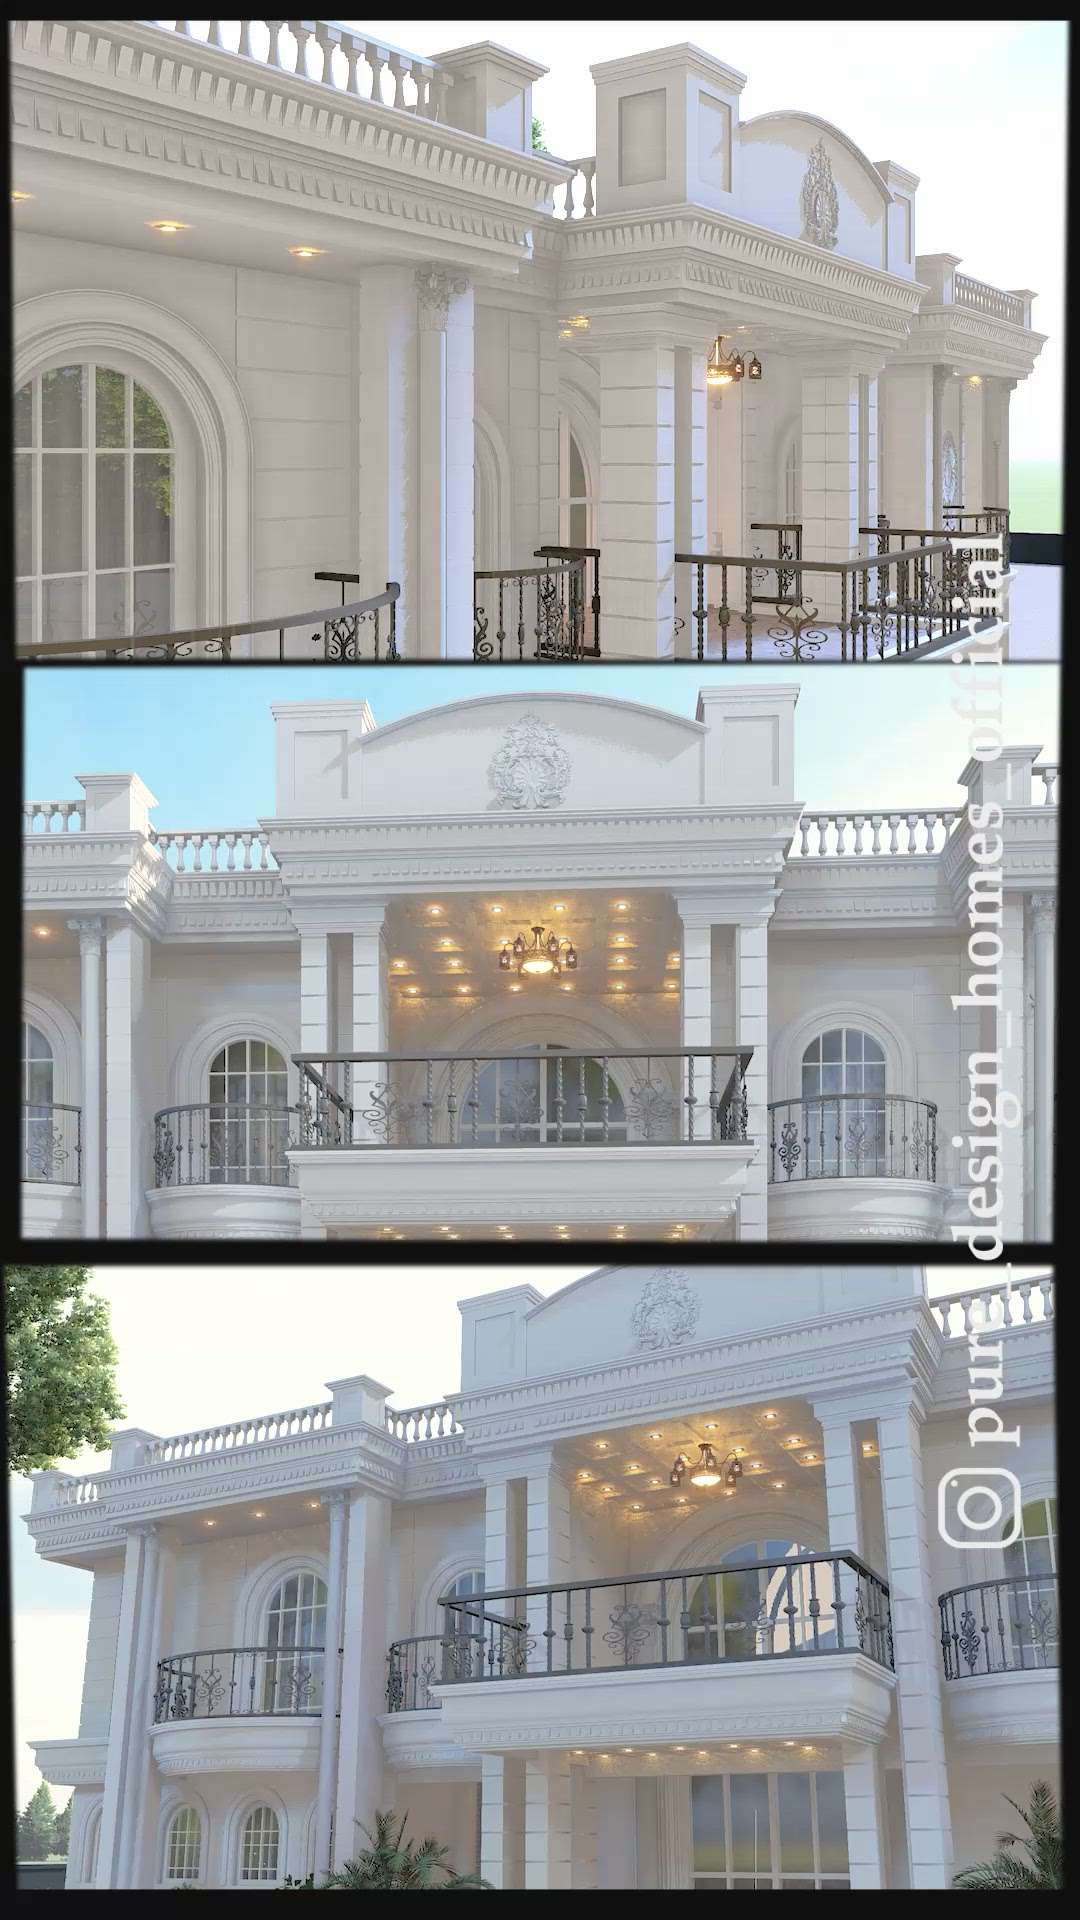 Neo Classic Architecture / luxury Classic house design /palace model house design
#neoclassicaldesign #classicalhome #palace

contact for more.....